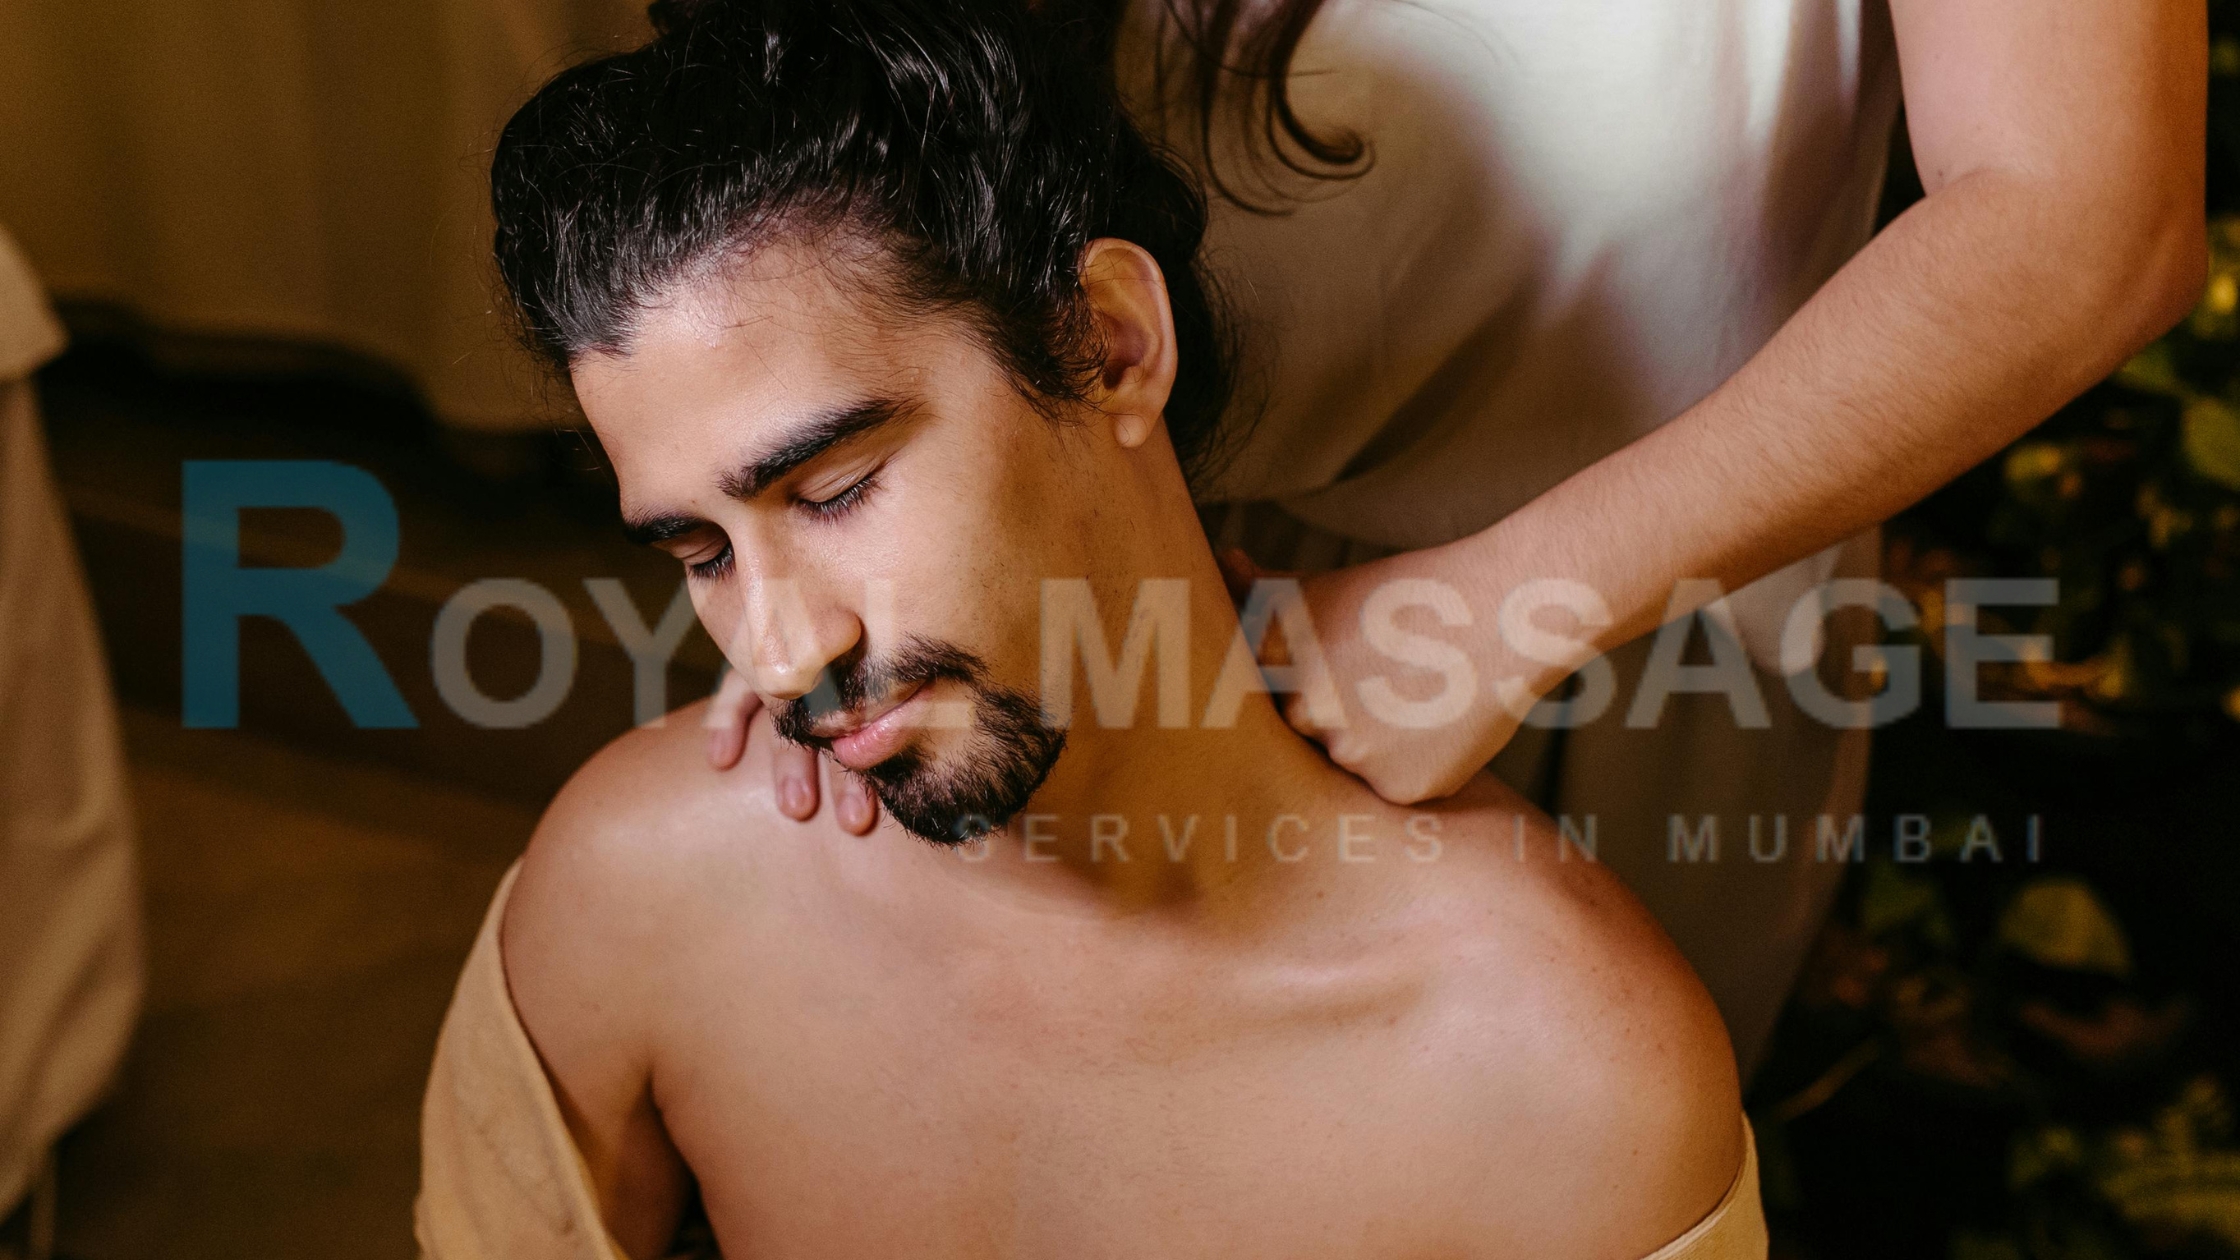 female to male full body massage services in Mumbai